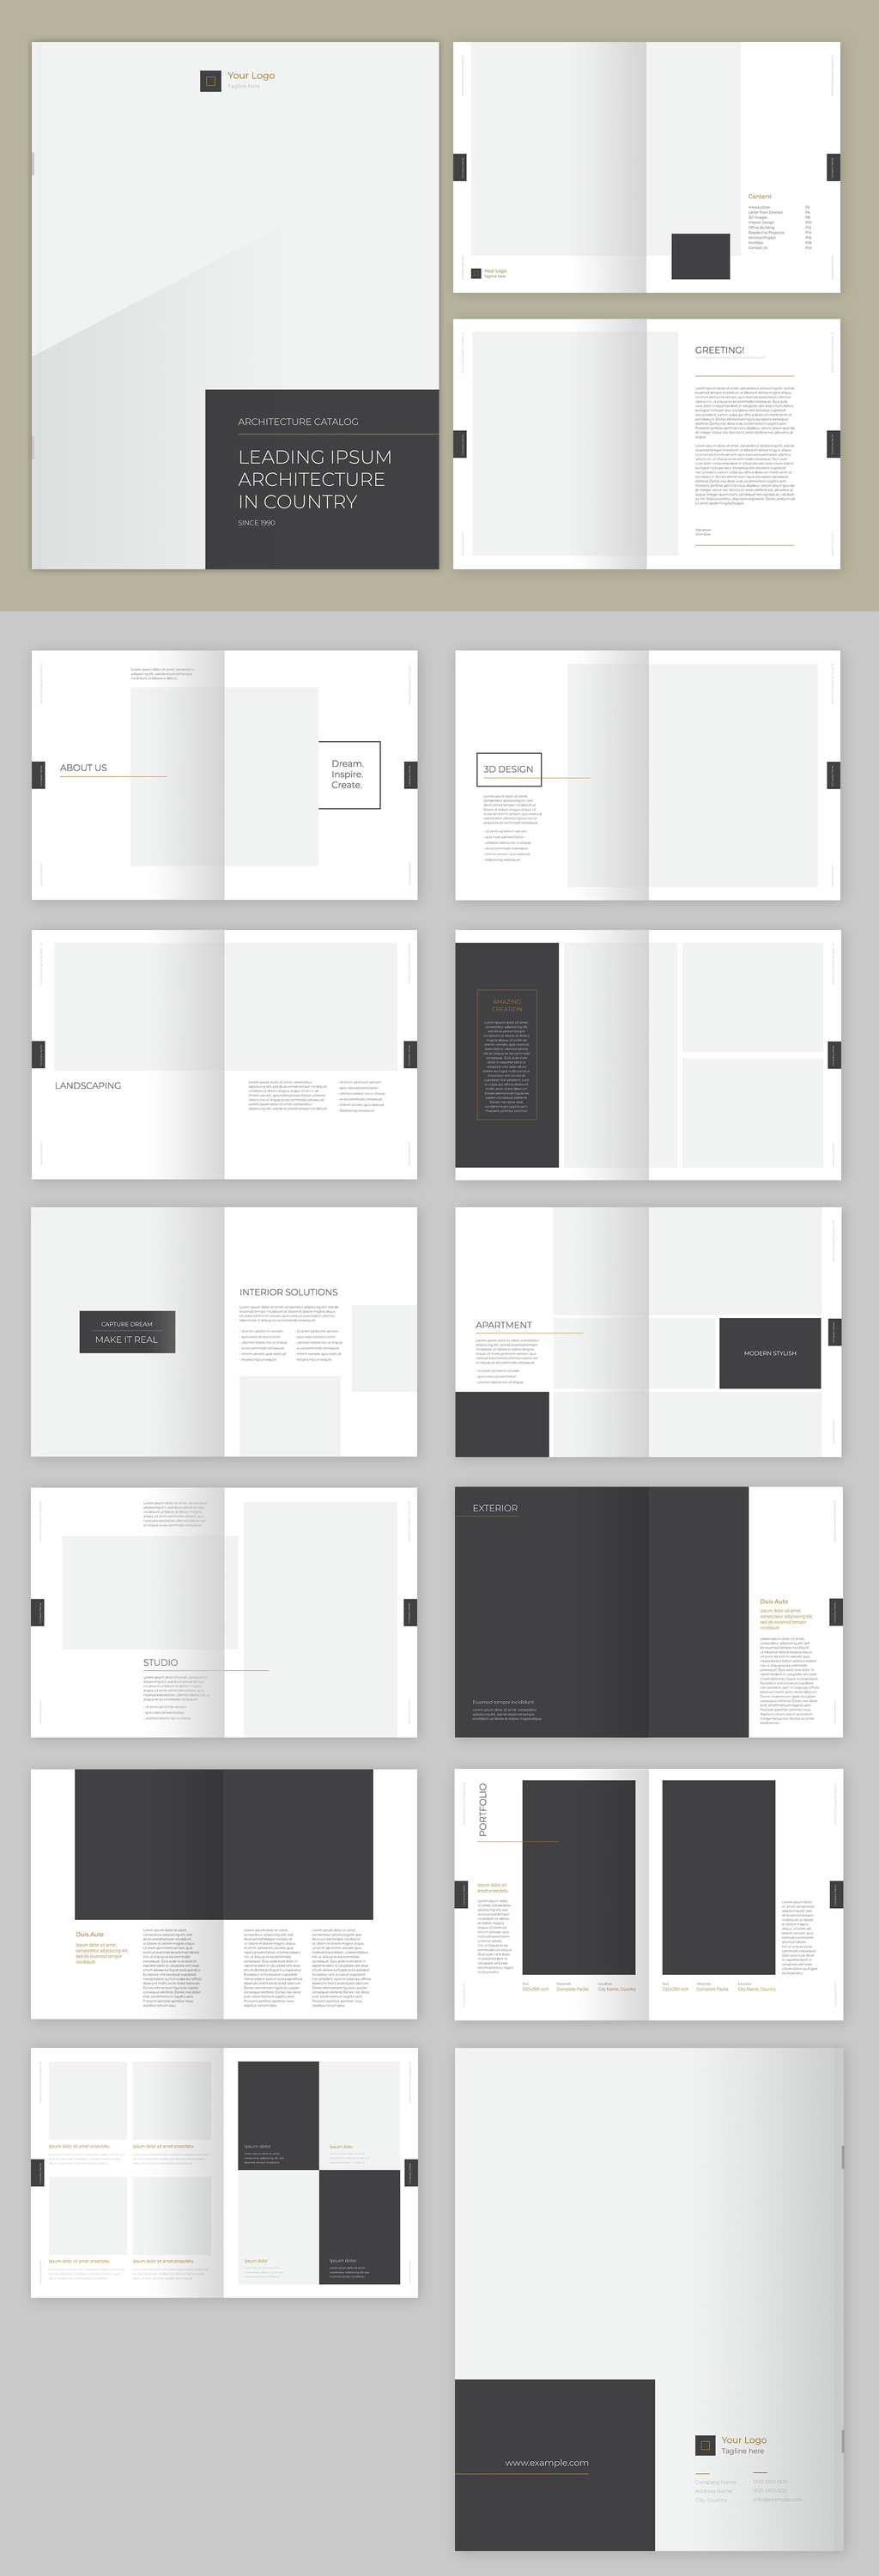 Catalog template with gray and gold accents from @afahmy.